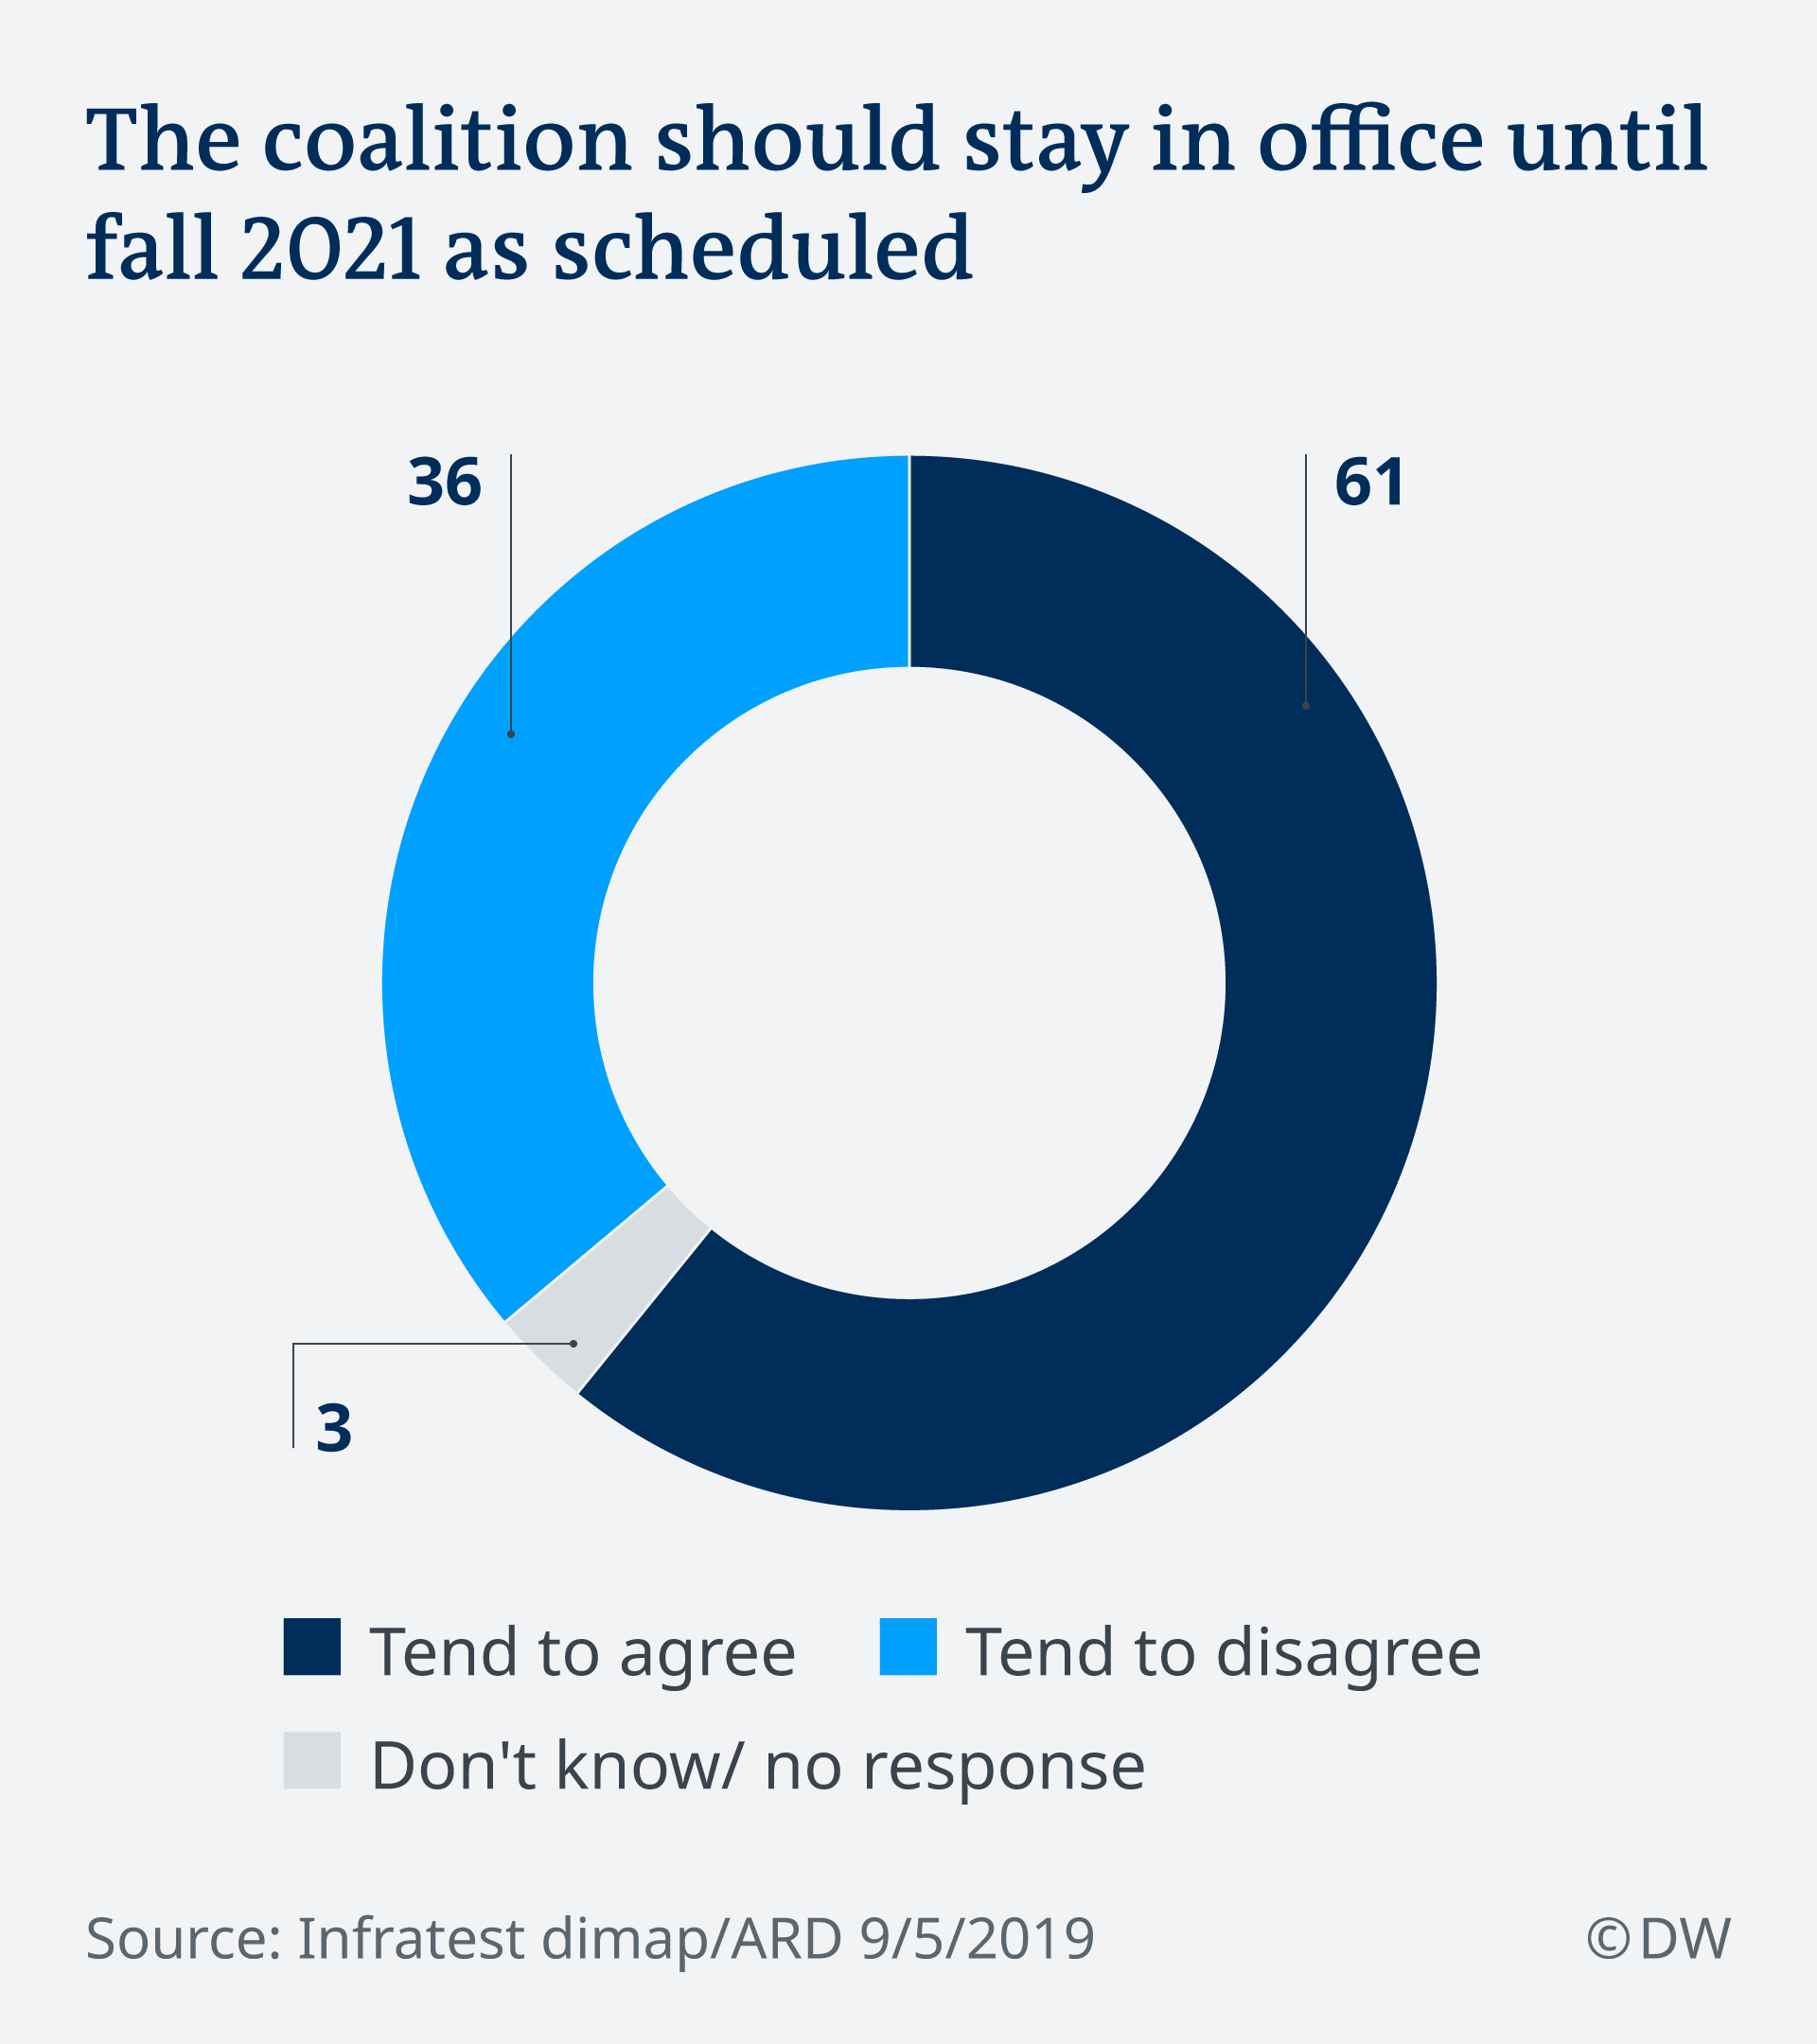 Some 61% want coalition to stay in office till 2021